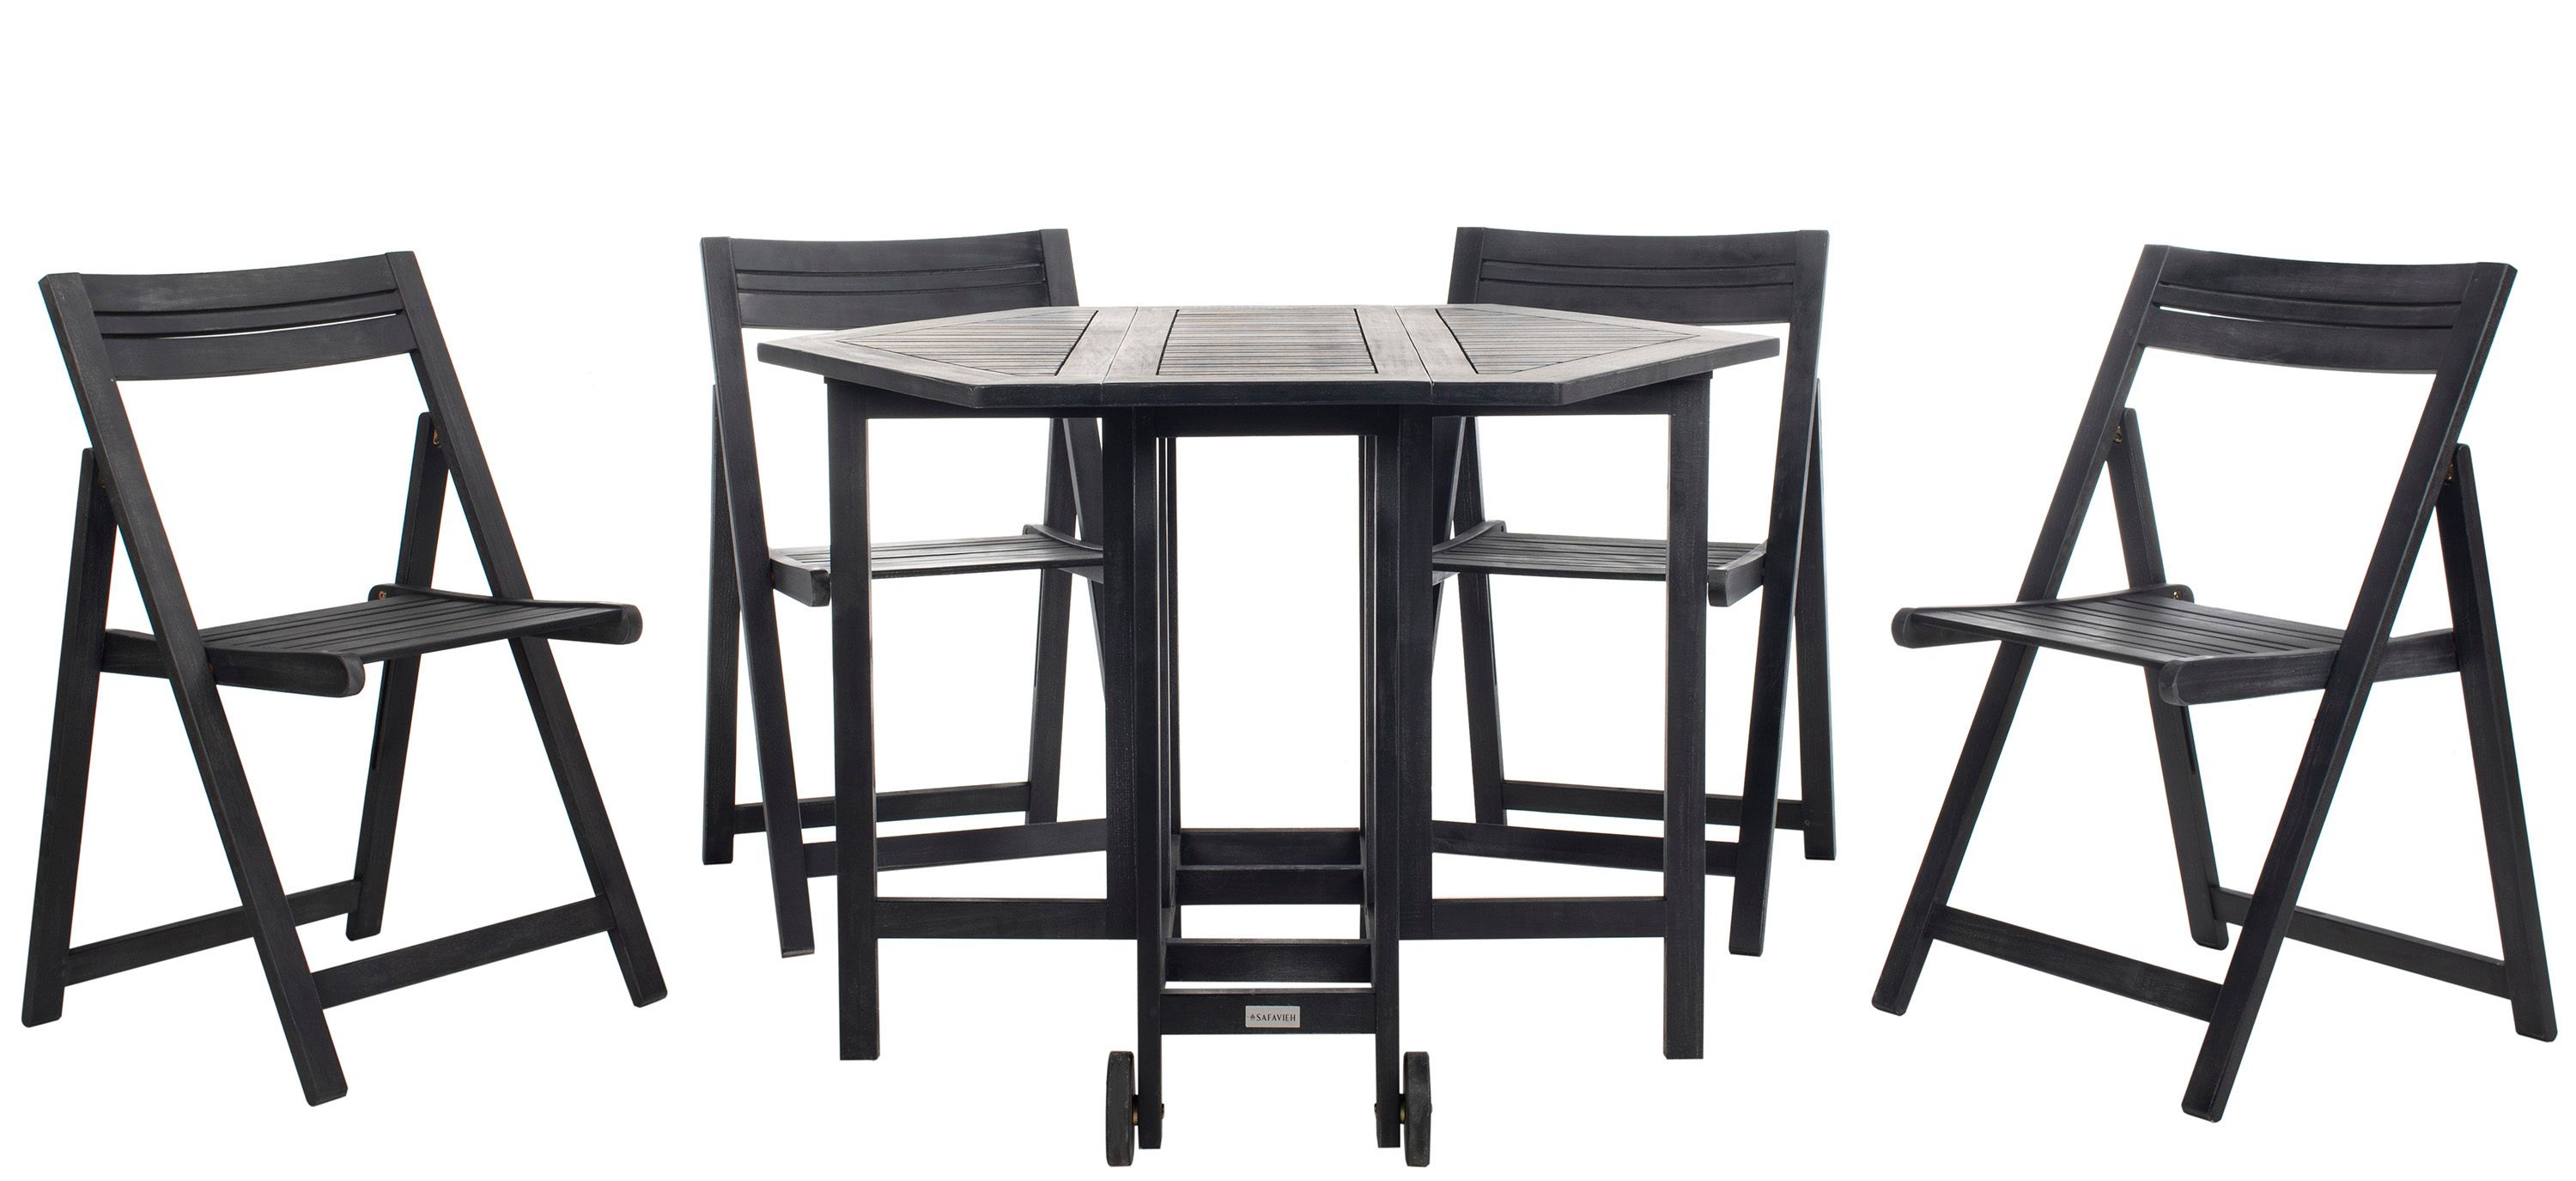 Julyvia Outdoor Table And 4 Chairs